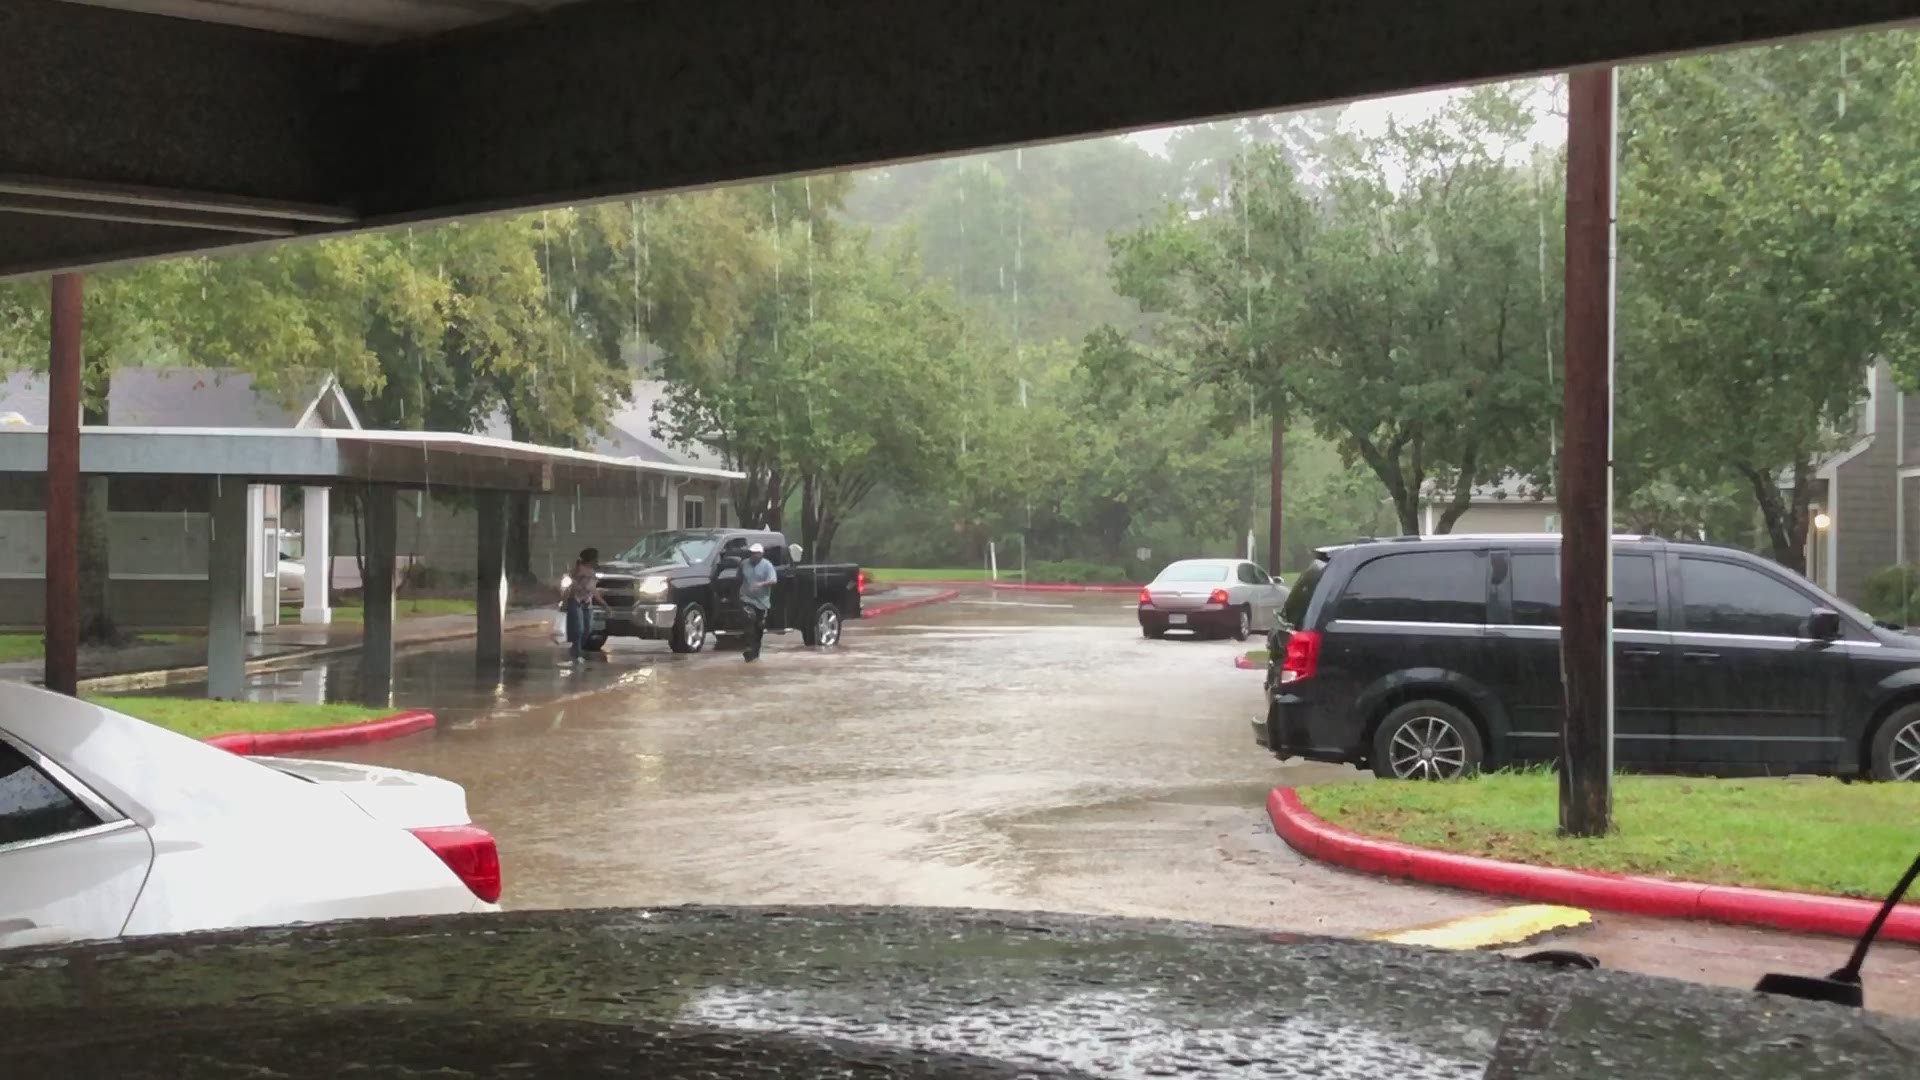 Some roads were impassable and some apartment complexes had flooded parking lots